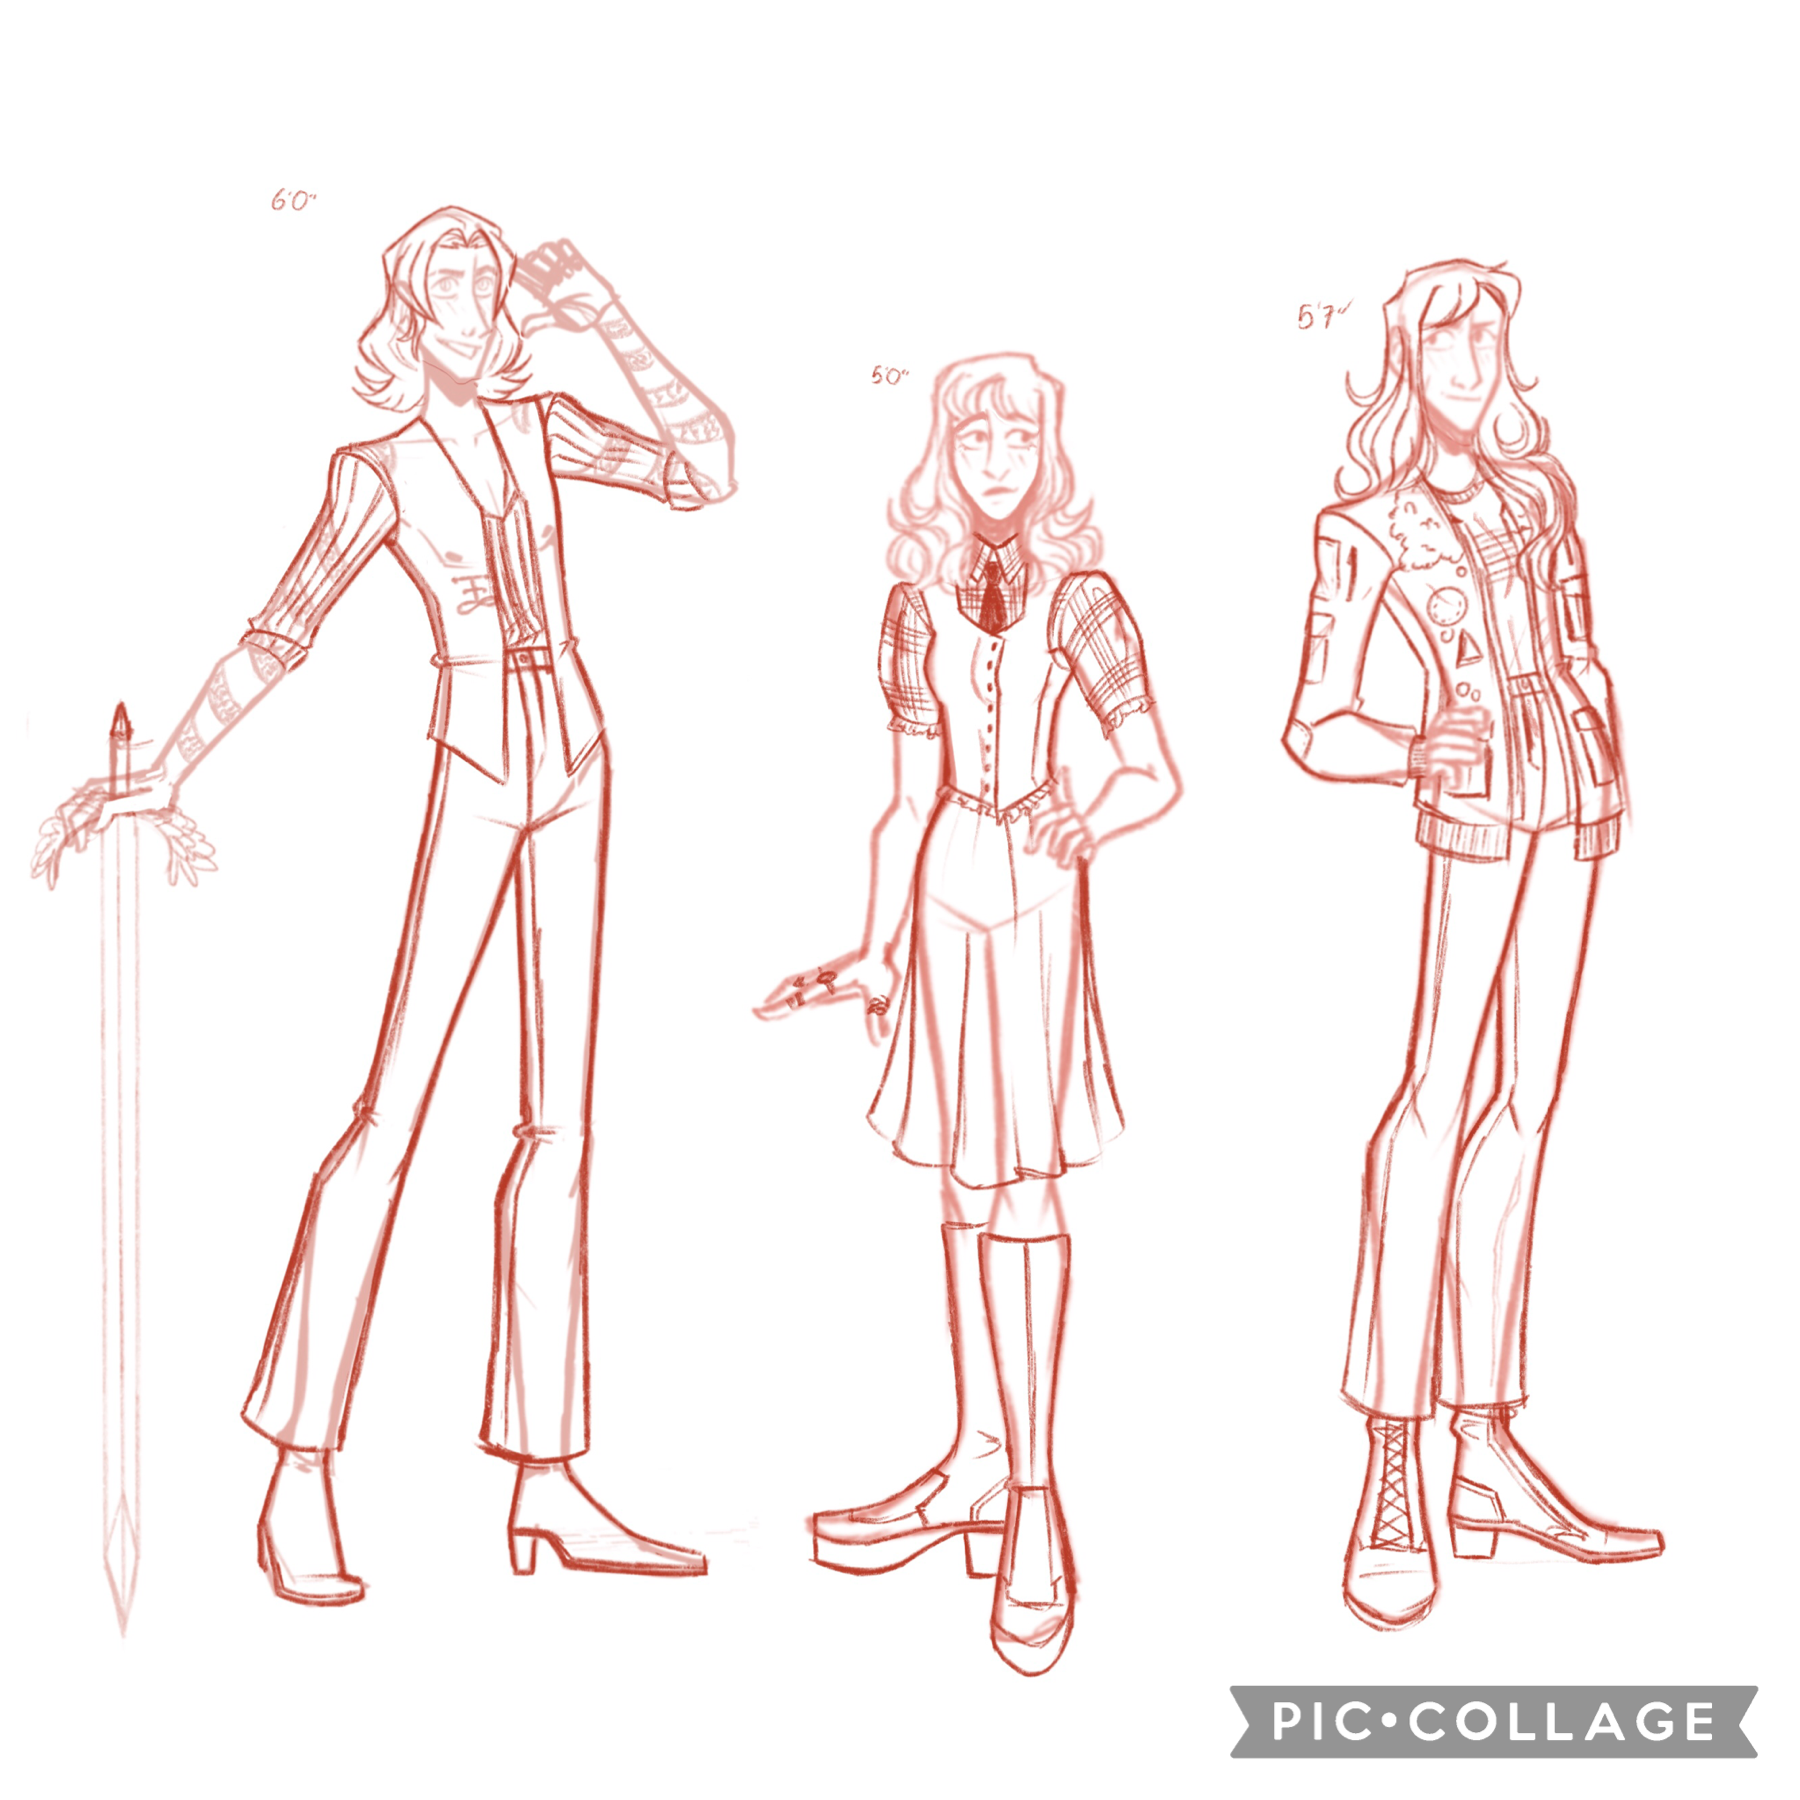 final lineup?? maybe??